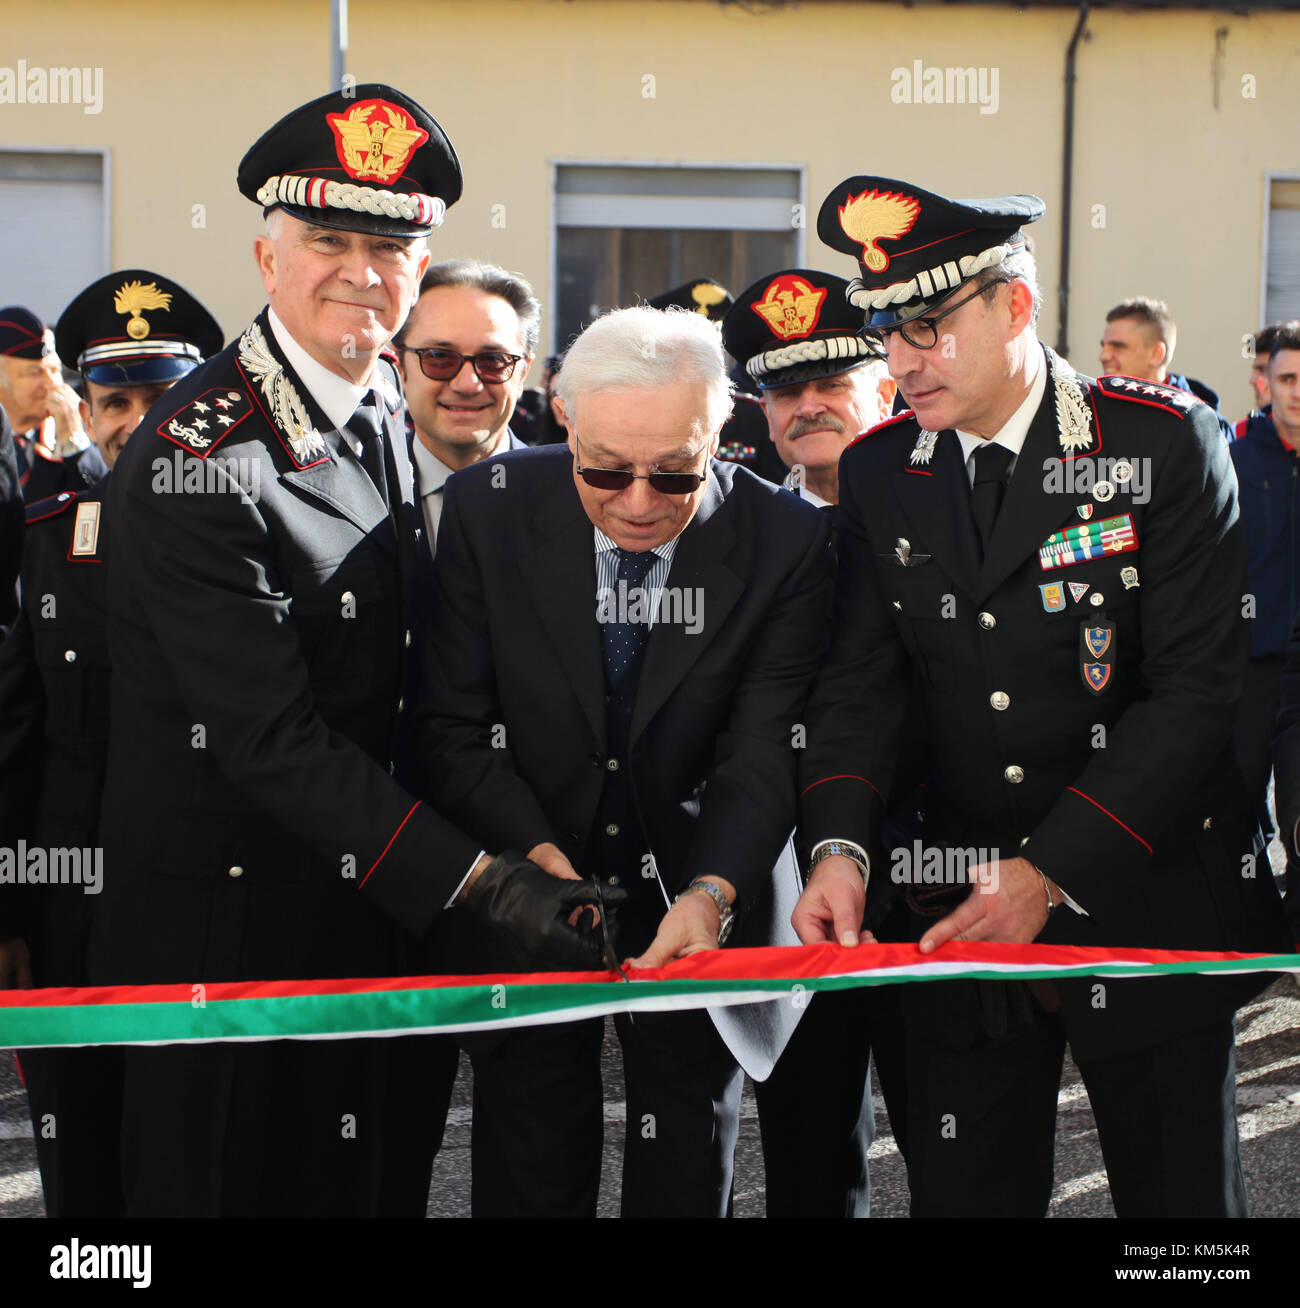 Italy. 4th Dec, 2017. Naples, Italy 4 December 2017 - .the president of the Italian boxing federation Vittorio Lai cuts the inaugural ribbon together with General Tullio Del Sette. this morning in the Scampia police barracks where the famous Gomorra series was filmed, the carabinieri's weapon inaugurated a box gym to remove the neighborhood children from the street. Credit: Fabio Sasso/ZUMA Wire/Alamy Live News Stock Photo